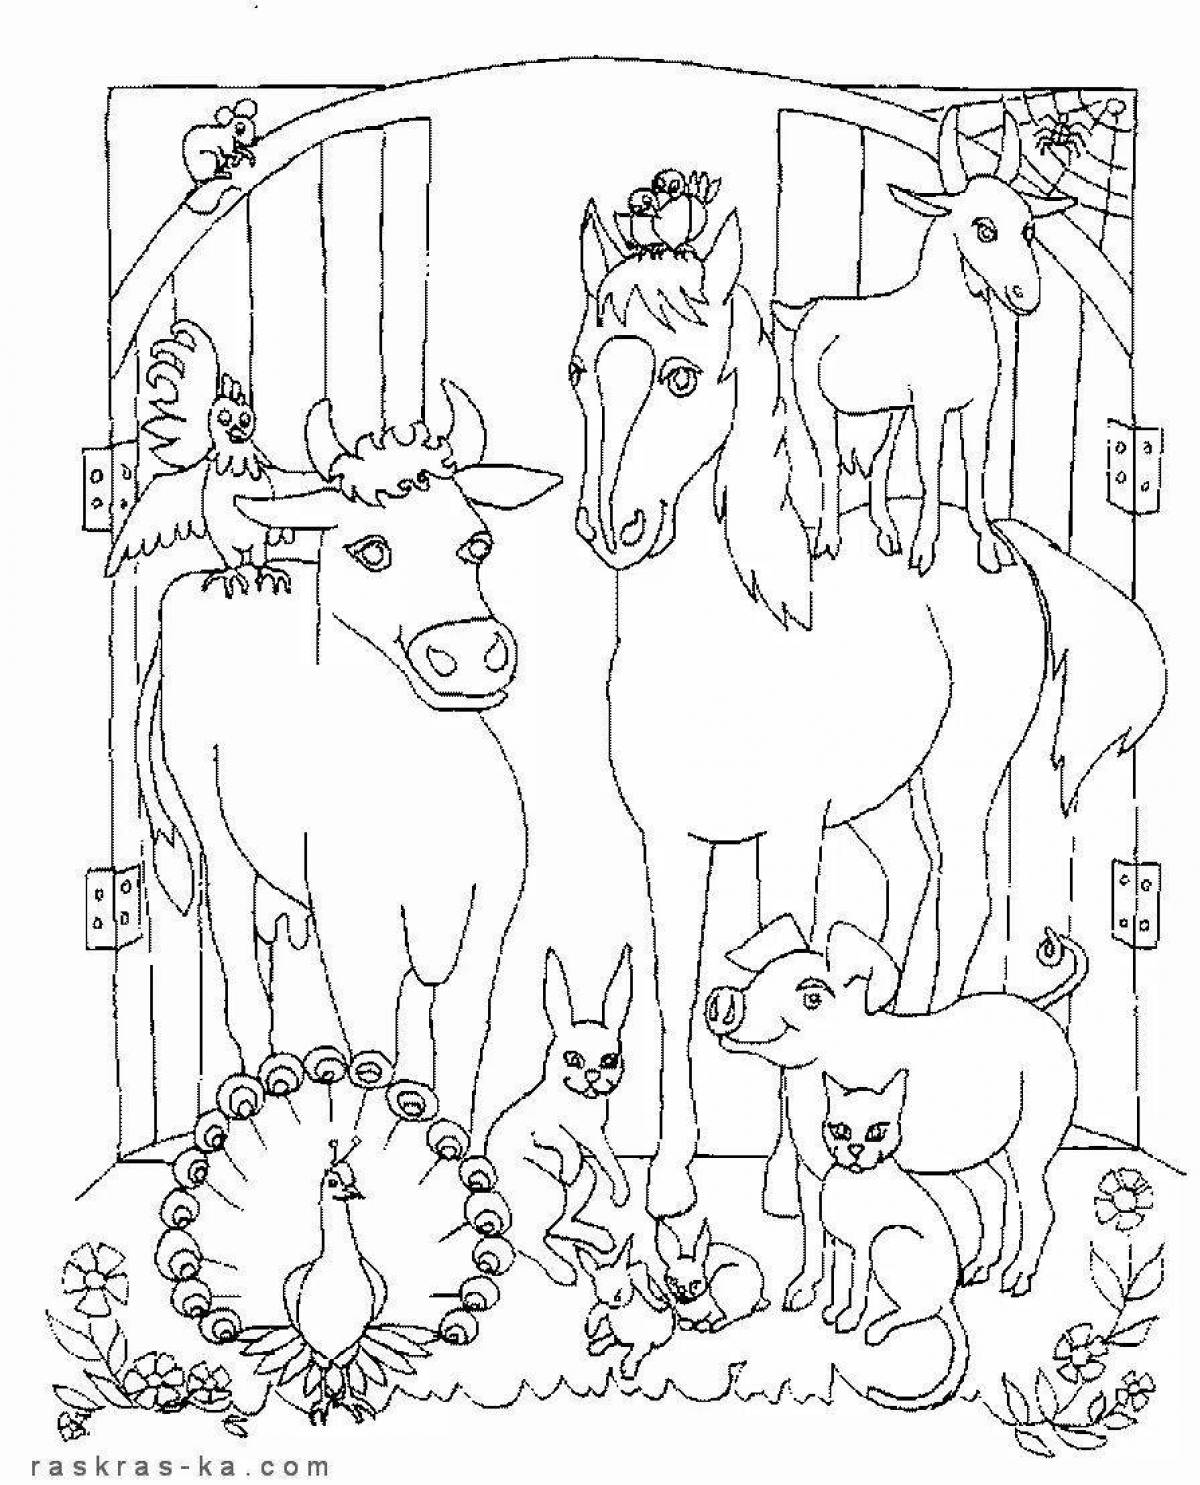 Coloring pages of pets for children 5-7 years old